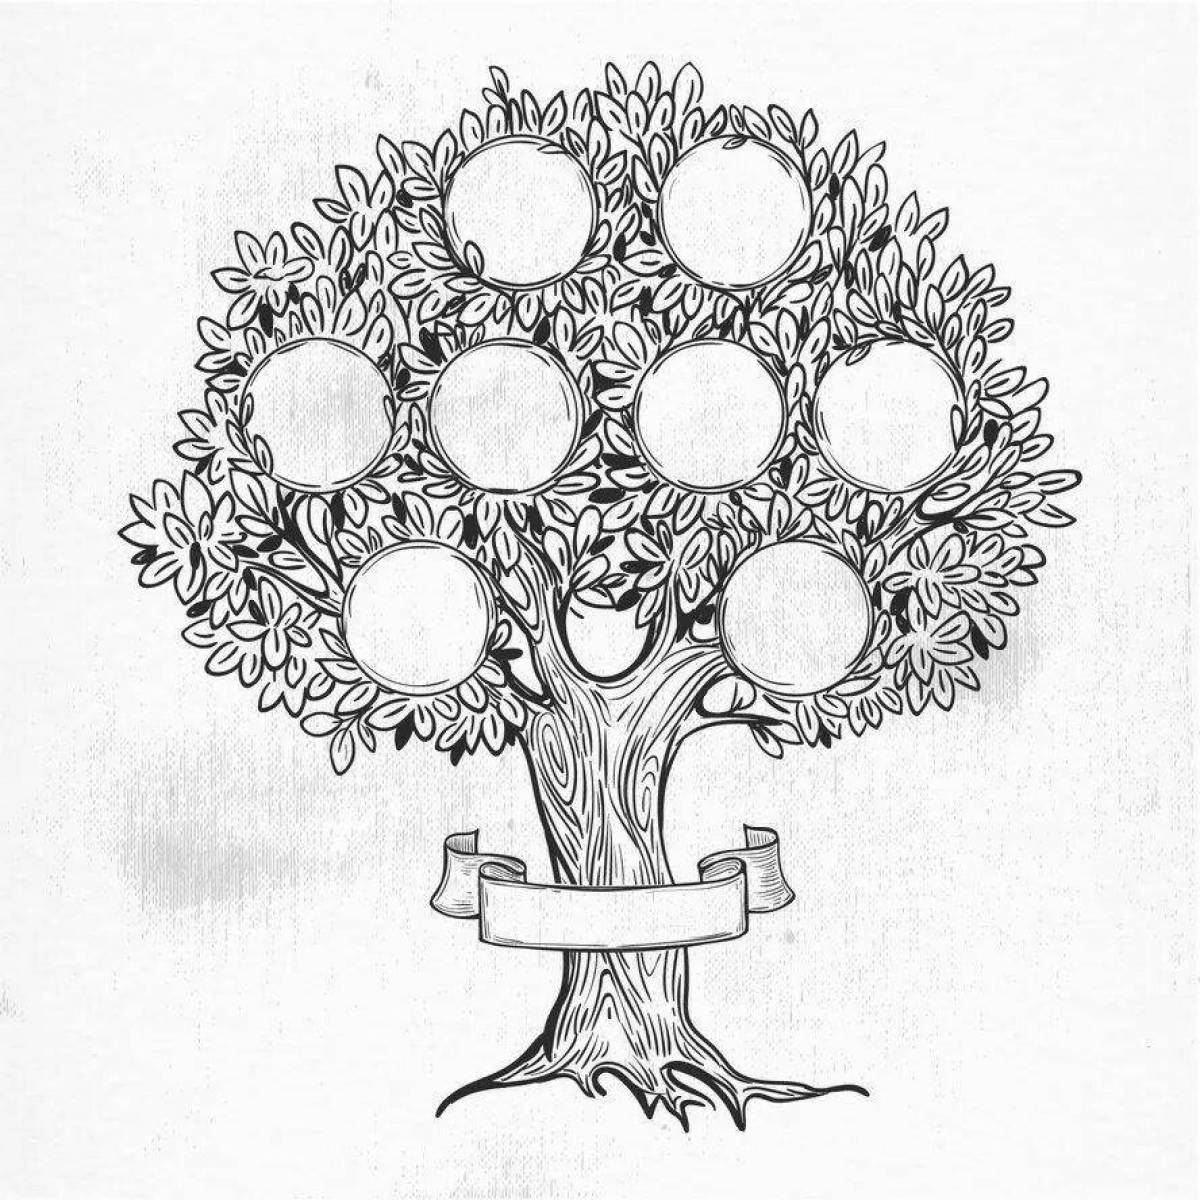 Living family tree coloring page